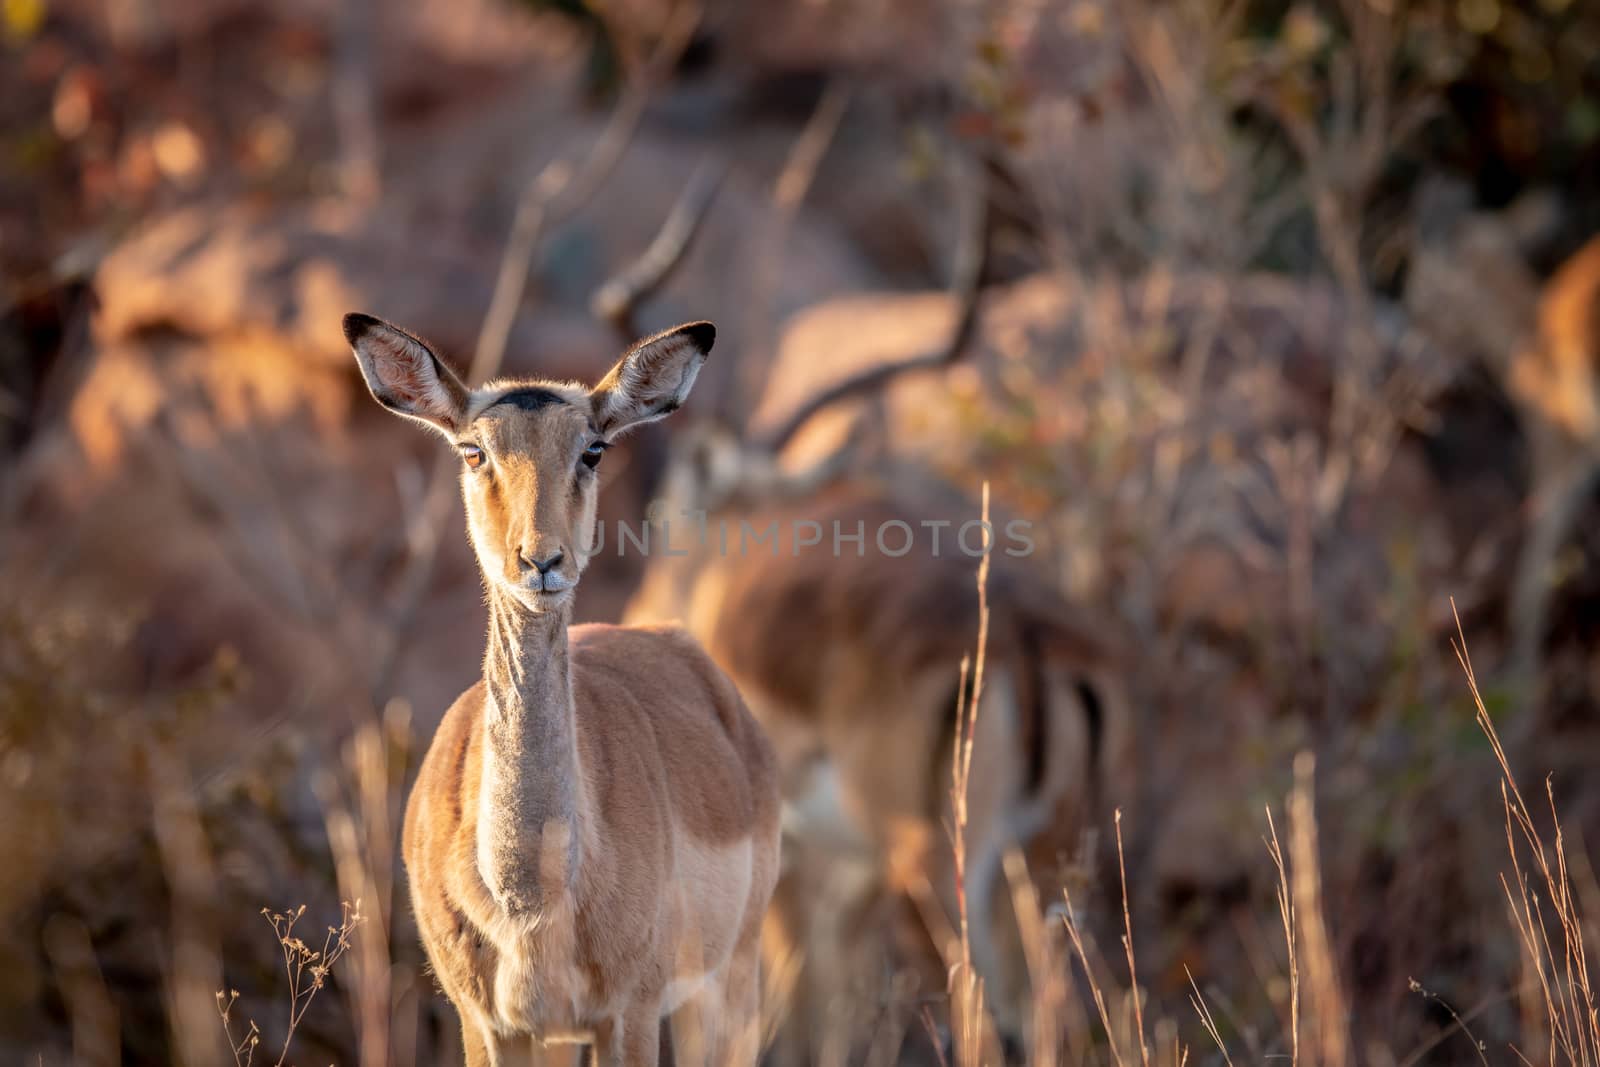 Young female Impala looking at the camera in the Welgevonden game reserve, South Africa.